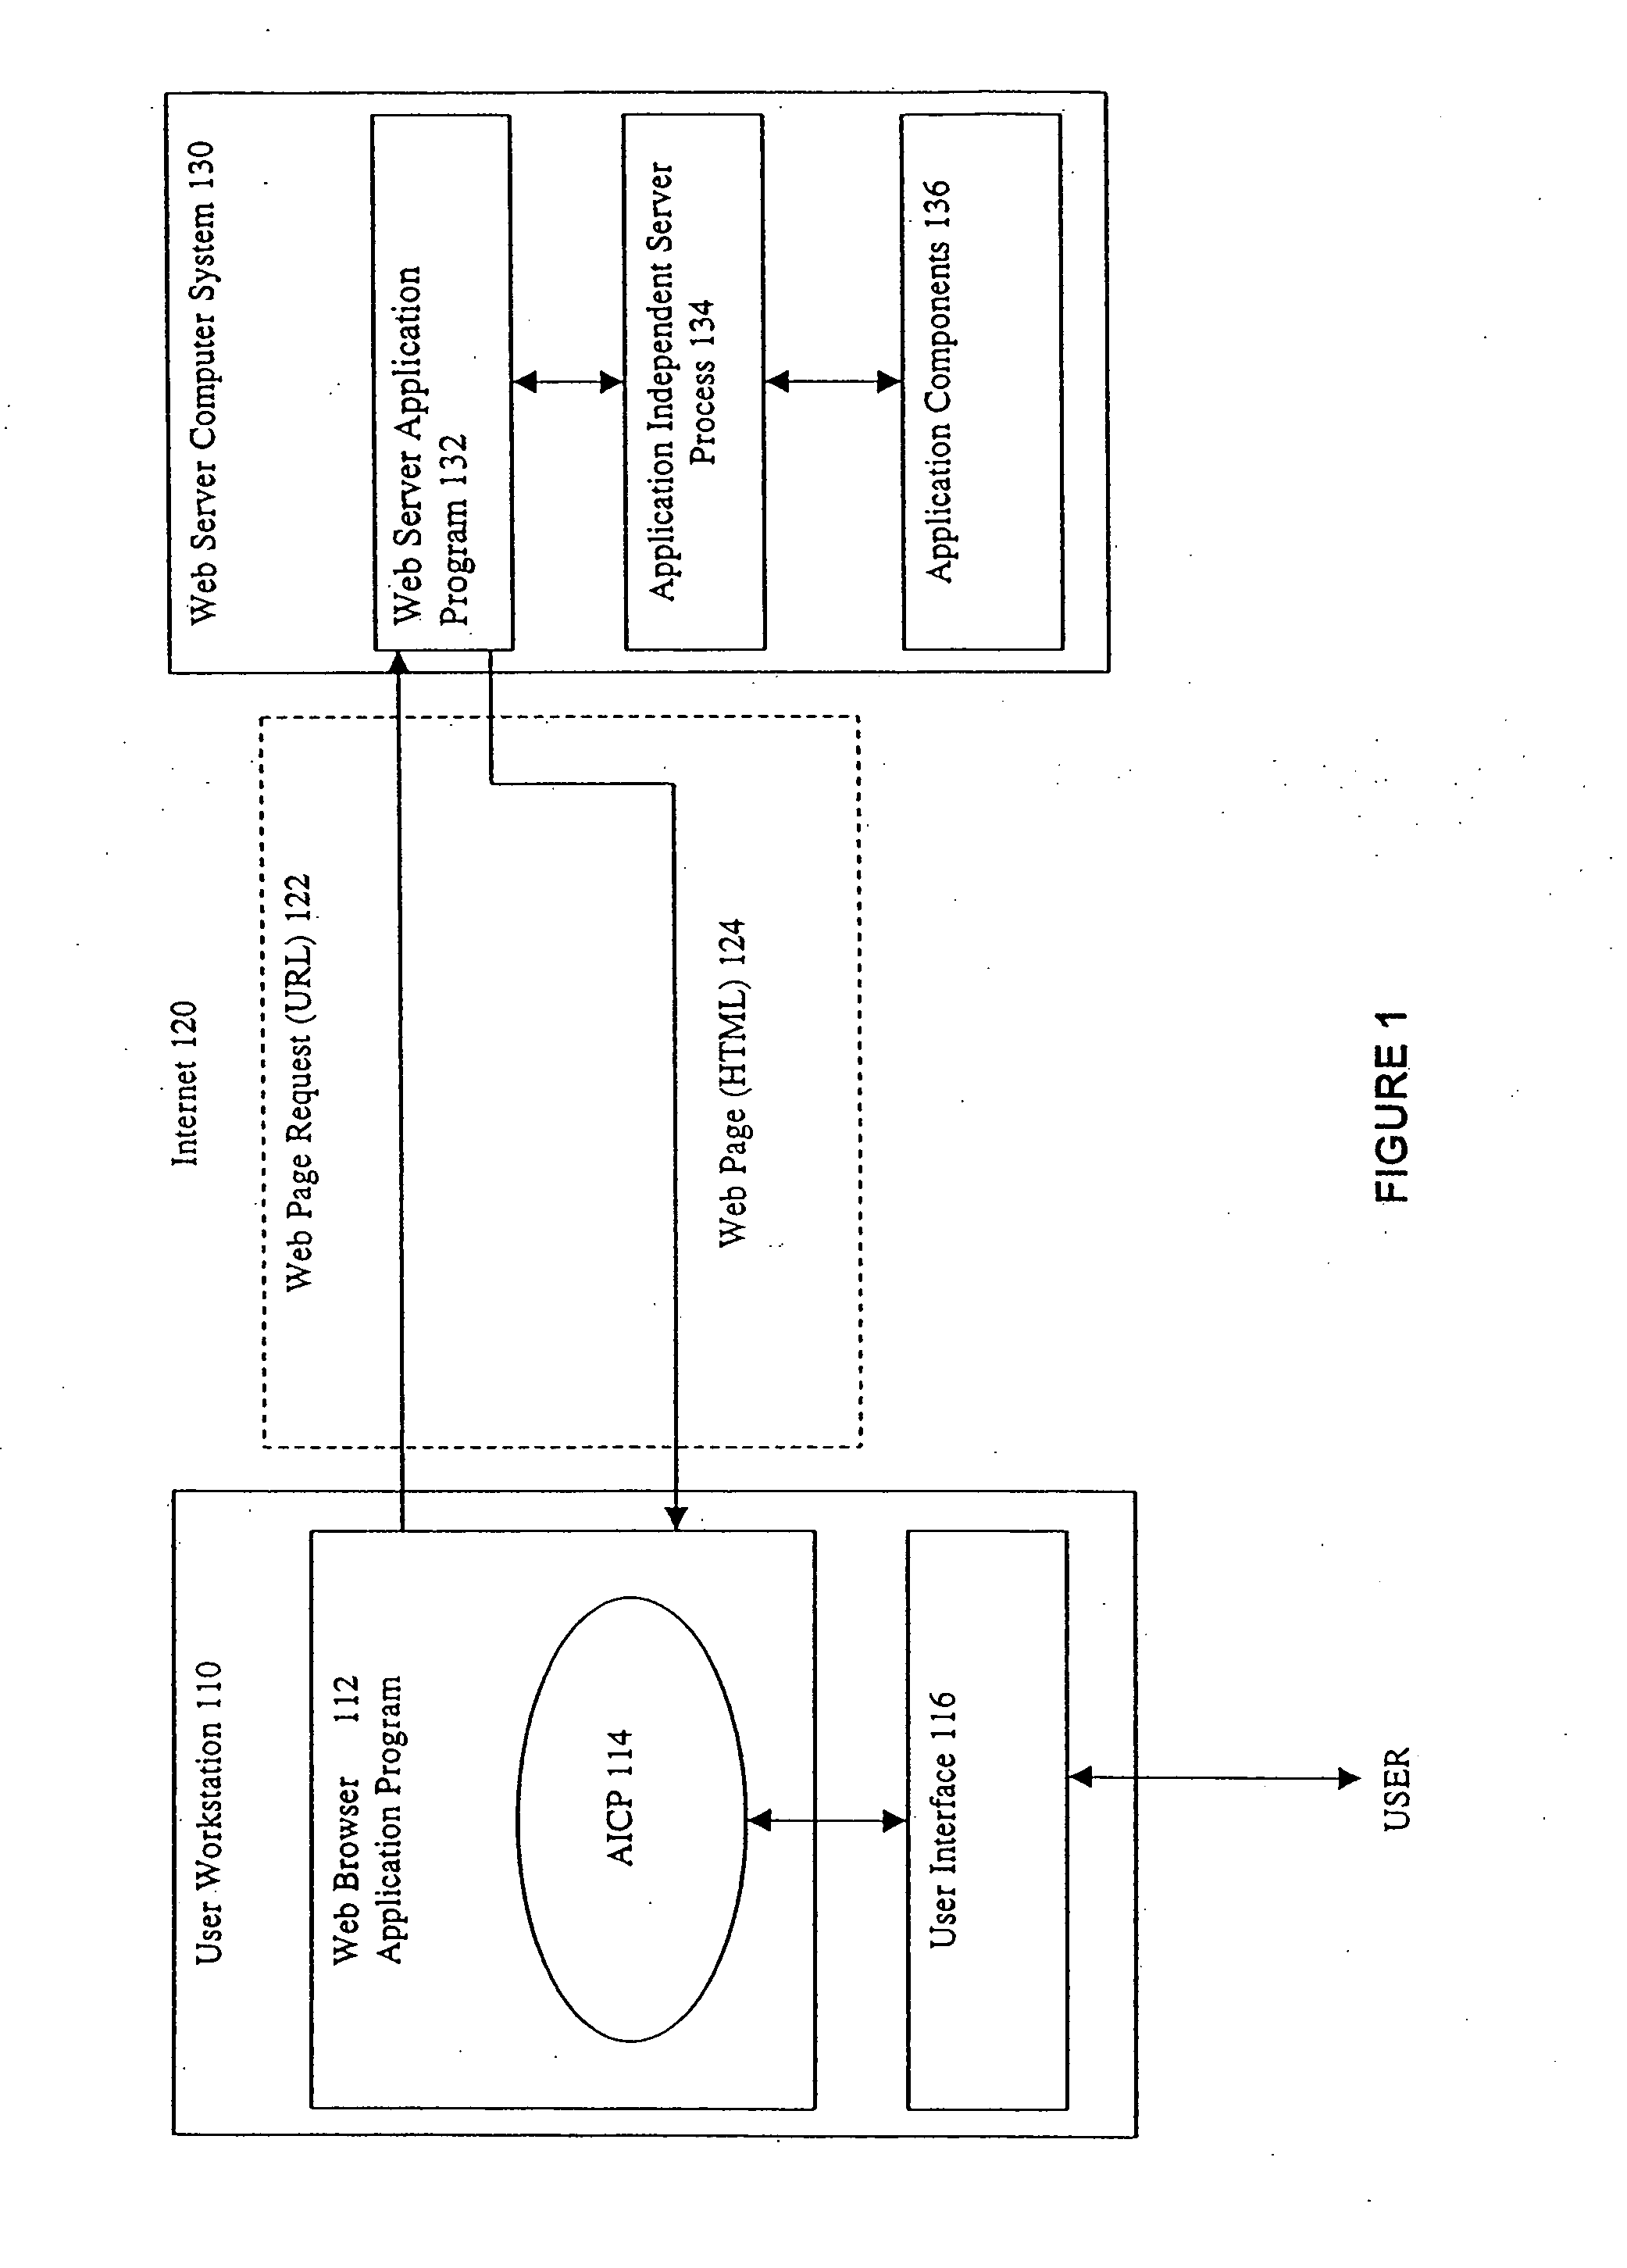 Methods and apparatus for efficiently transmitting interactive application data between a client and server using markup language